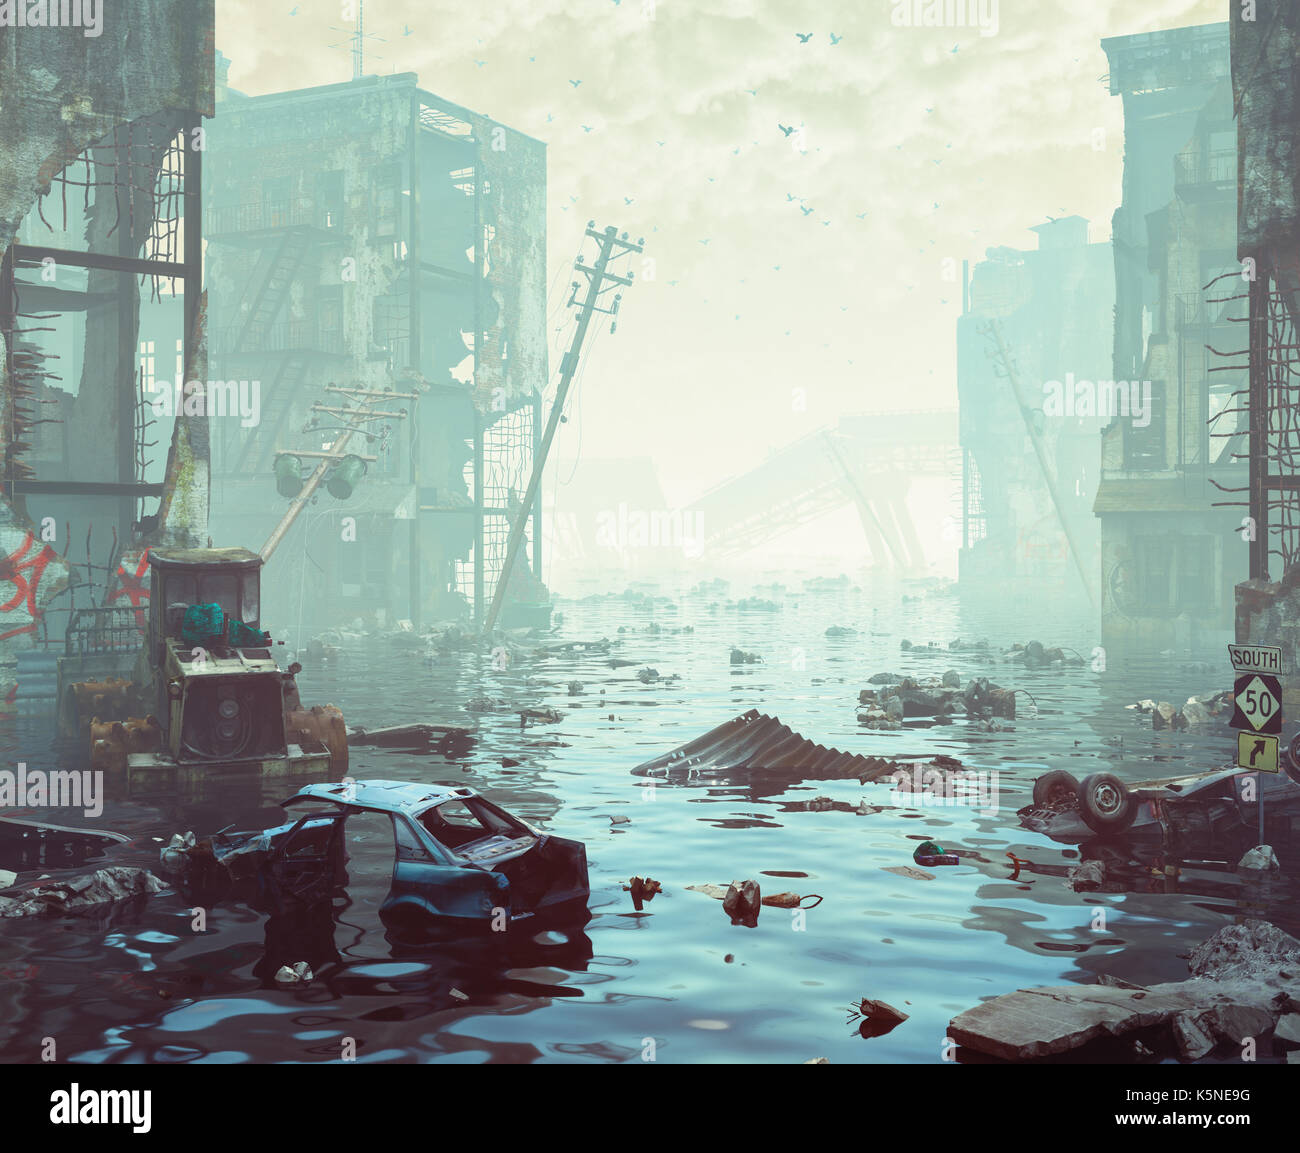 Ruins of the flooding city. Apocalyptic landscape.3d illustration concept Stock Photo